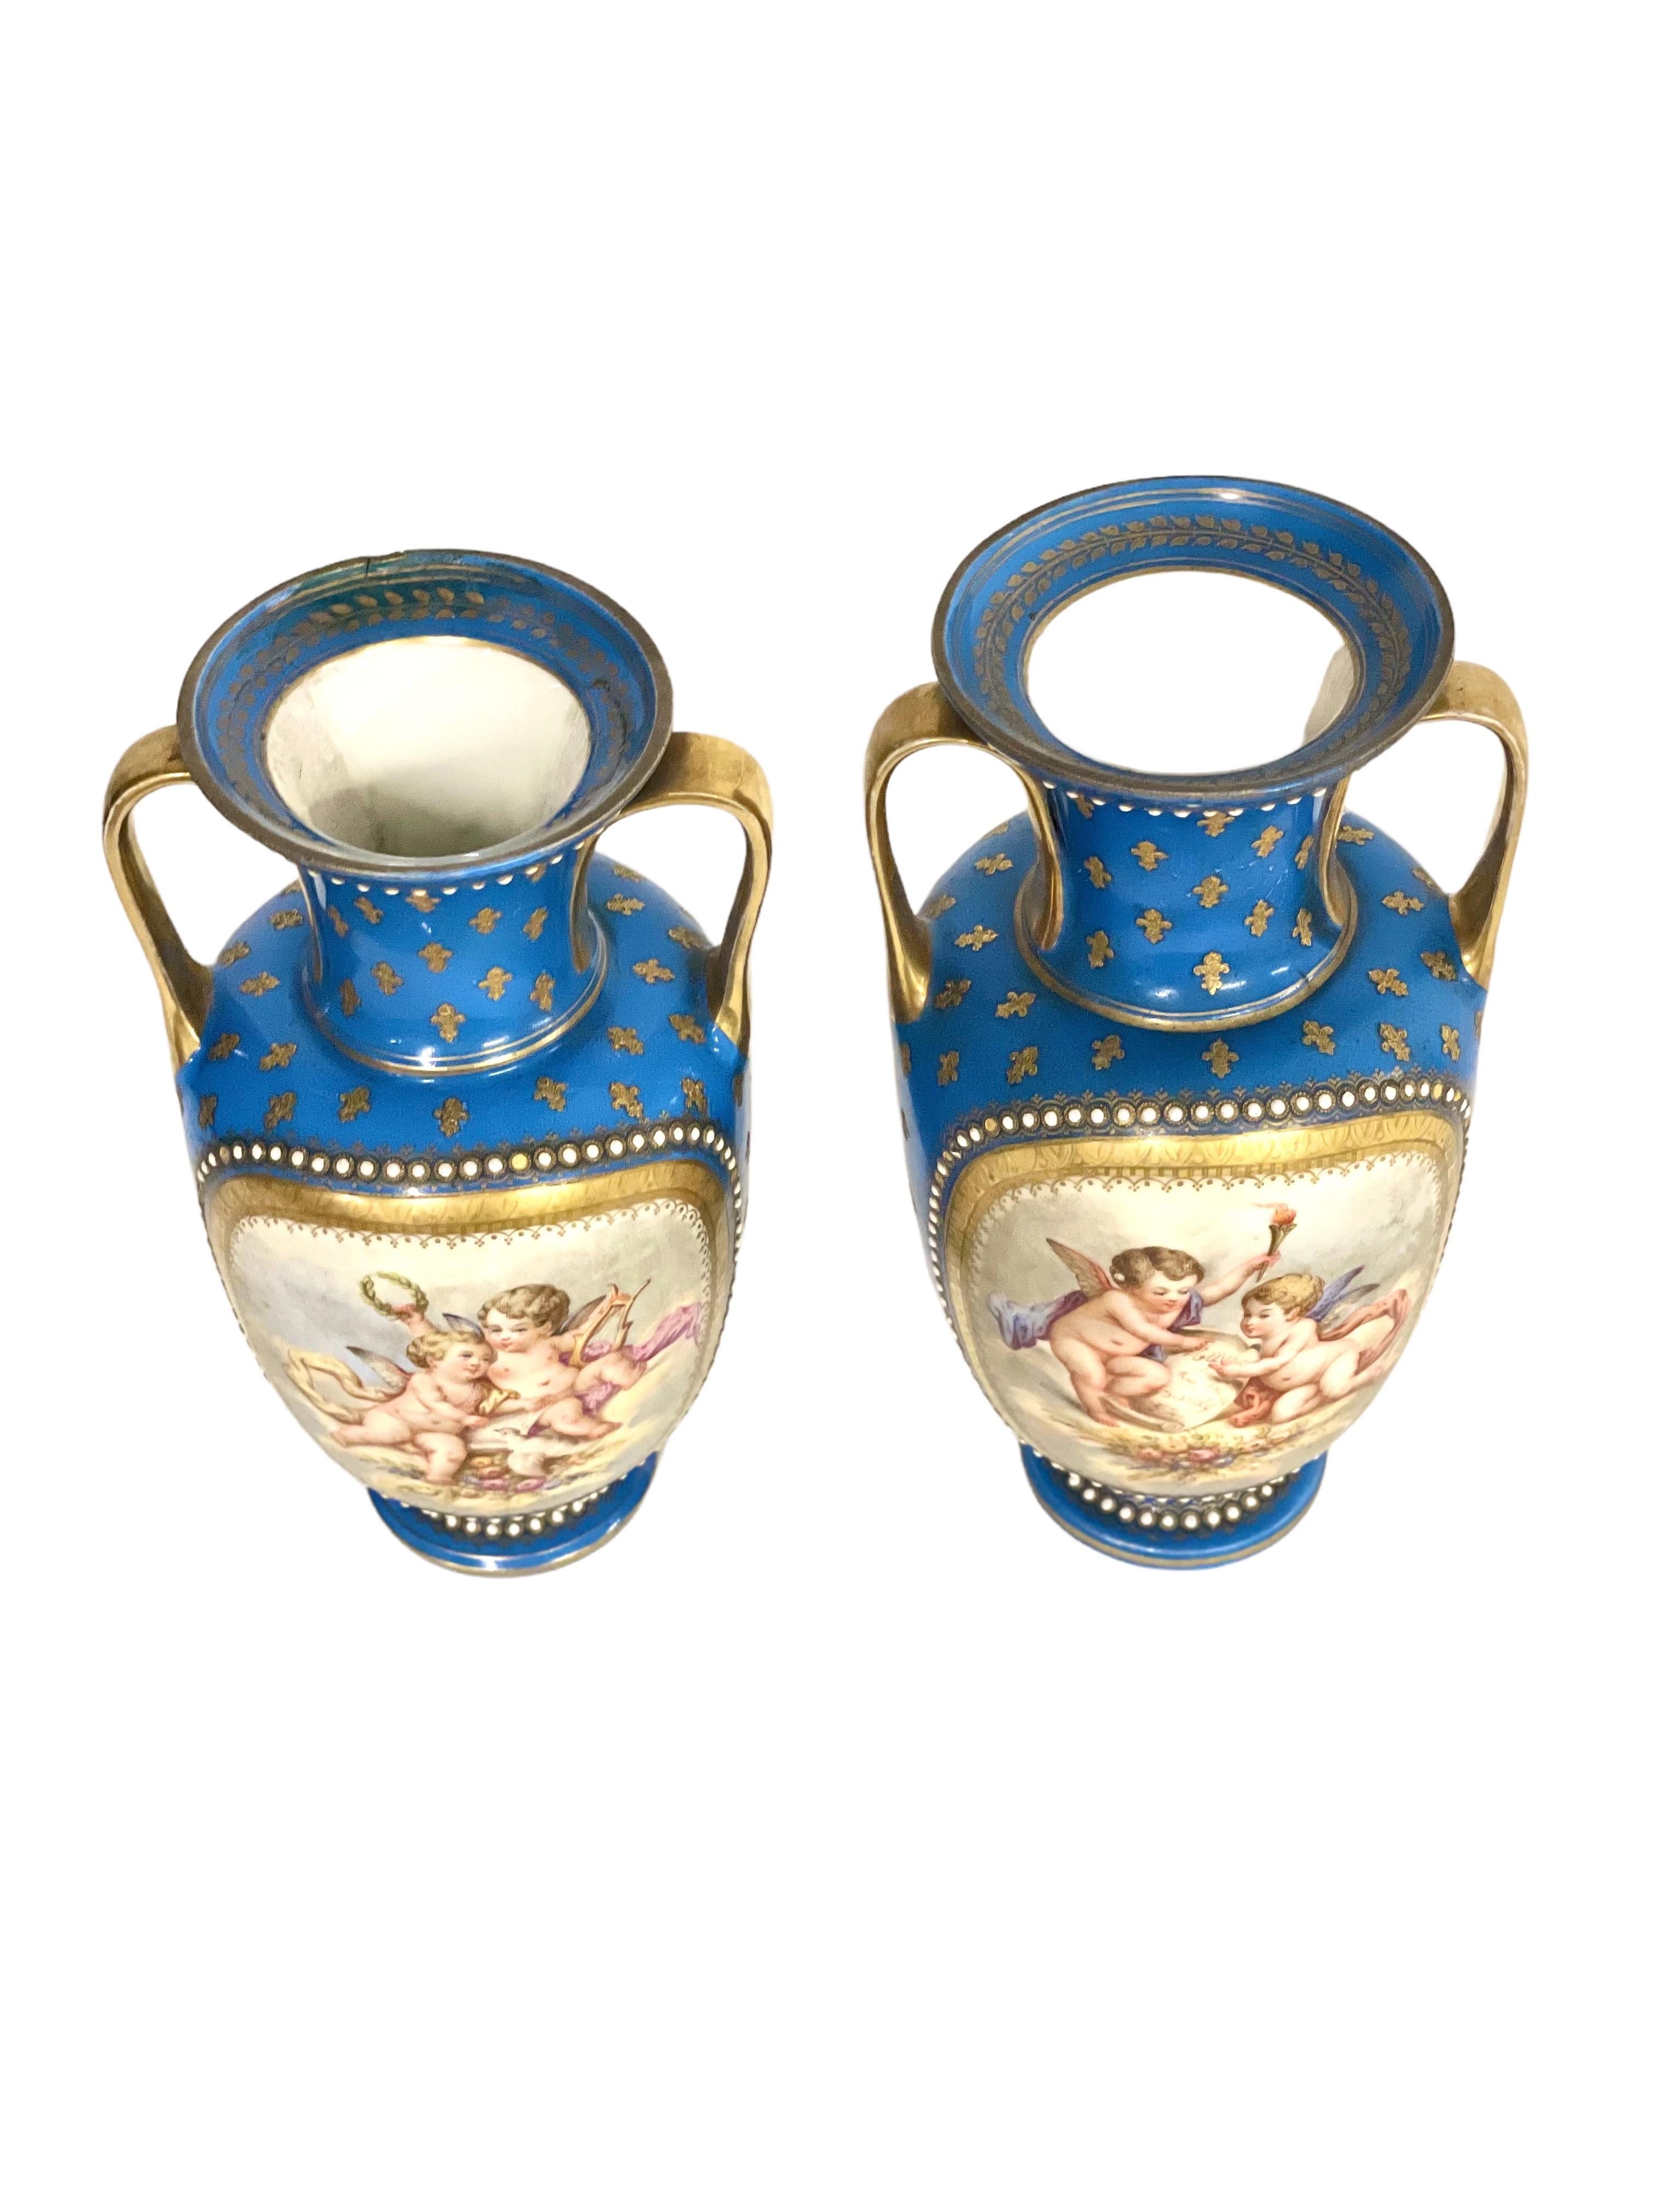 Charles X Sèvres Pair of Gilded and Blue Porcelain Vases, 19th Century